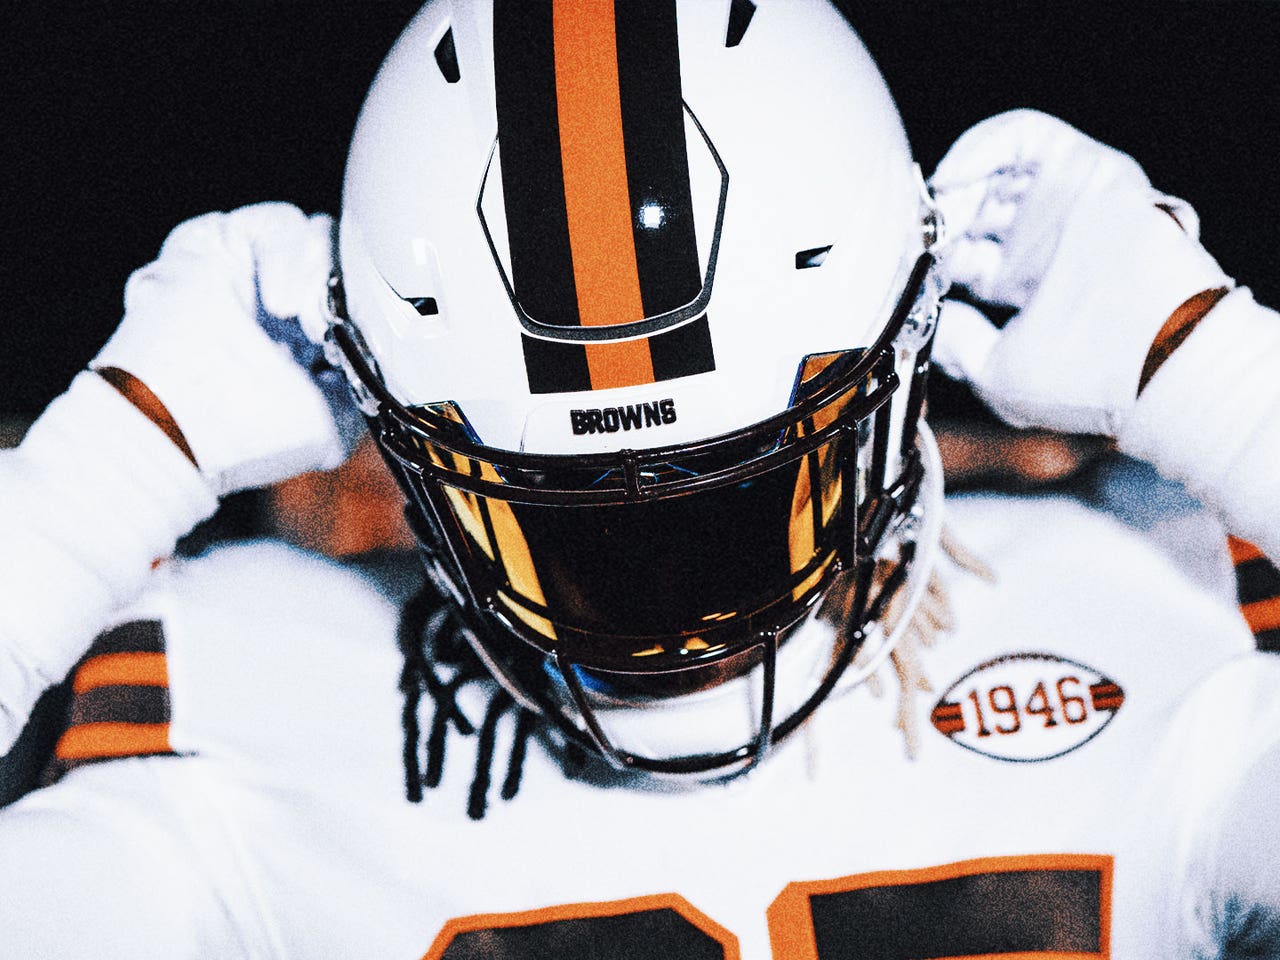 Cleveland Browns To Wear New White Helmets With 1946 Throwback